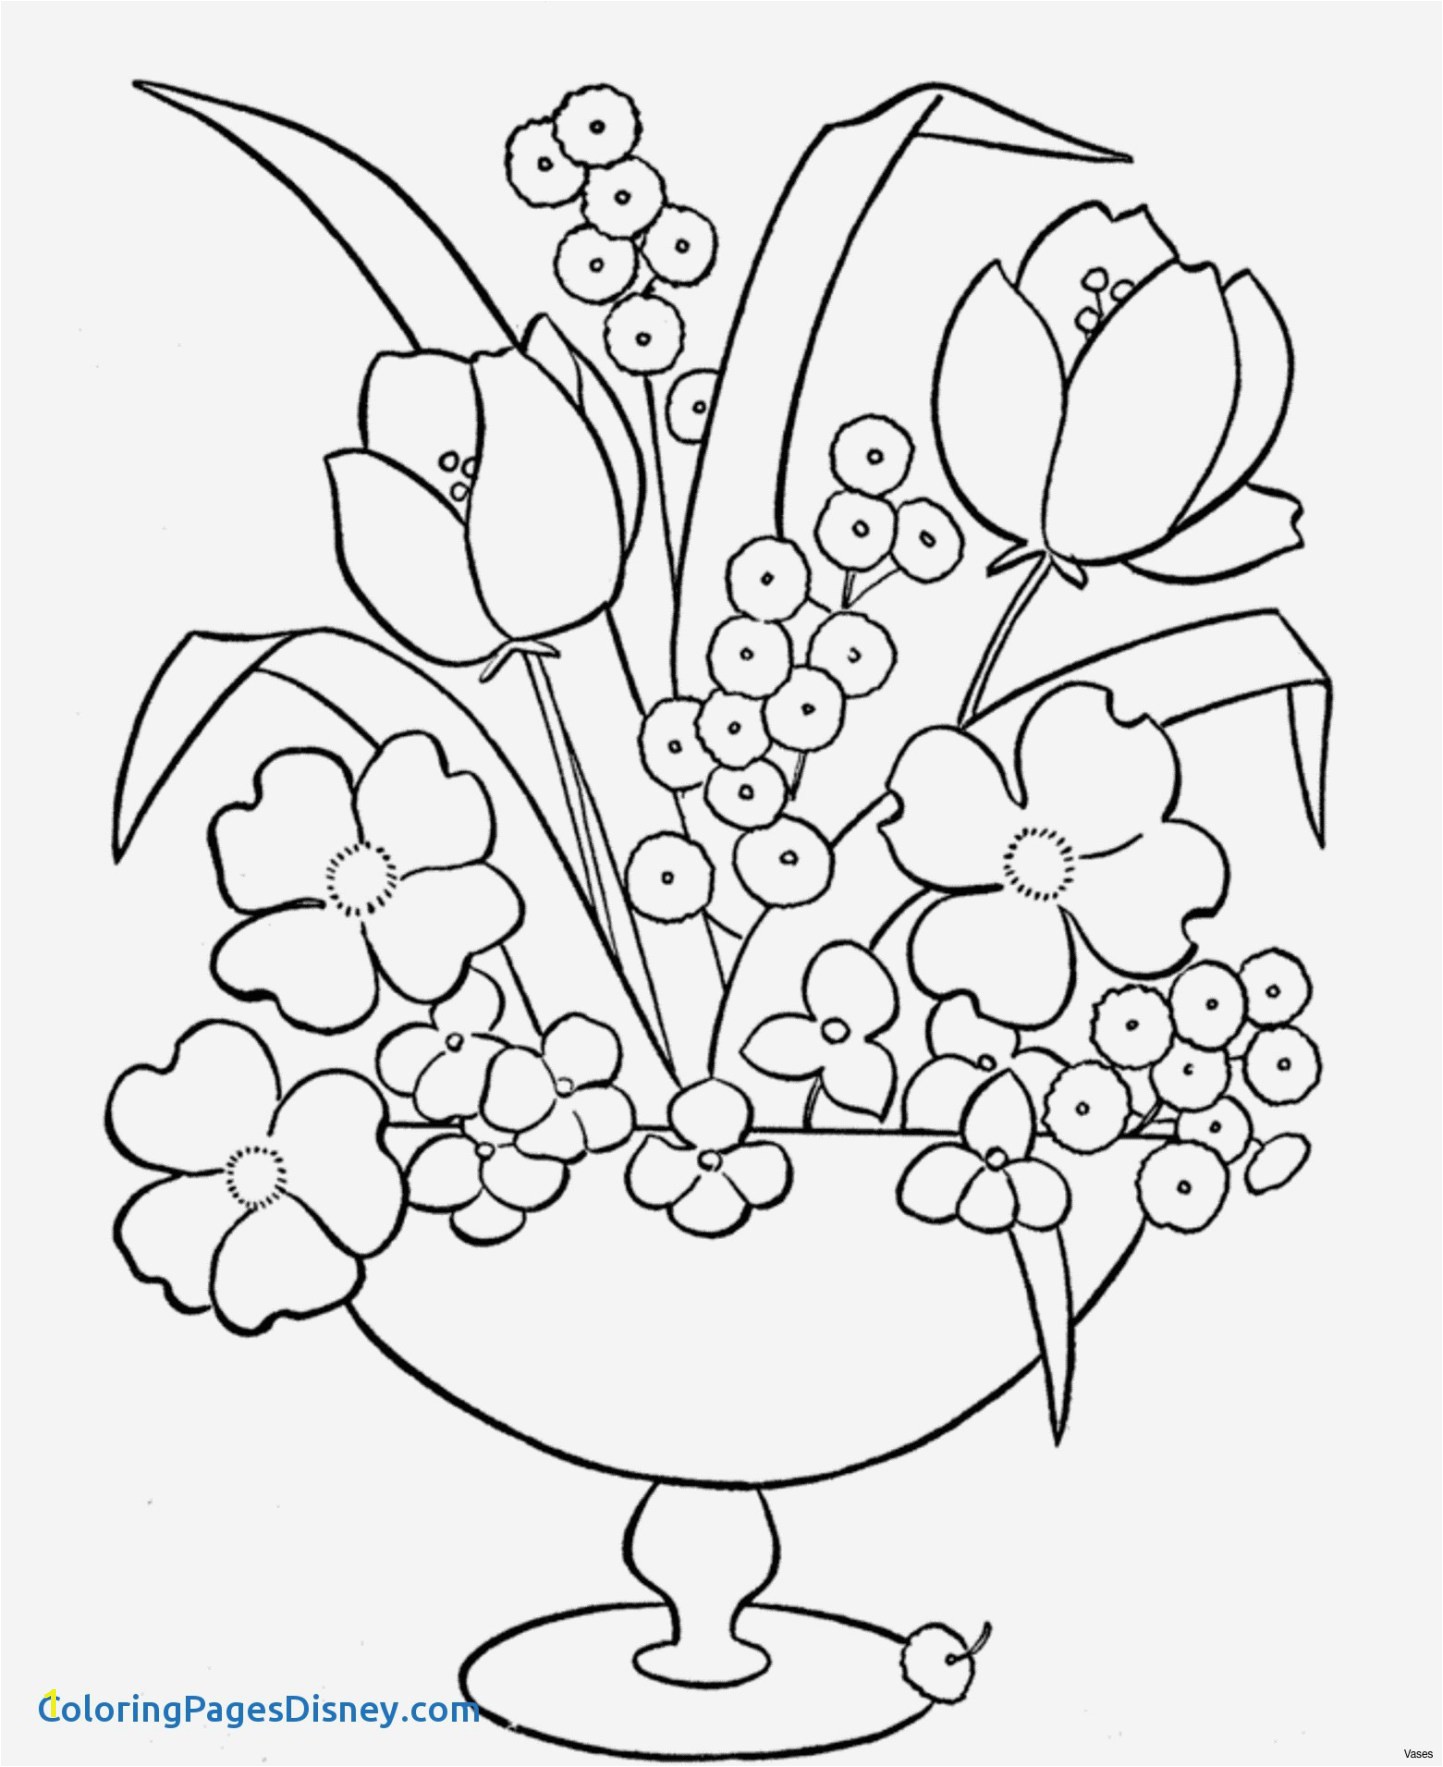 Phantom Menace Coloring Pages Witch Coloring Pages Luxury Nasturtium Coloring Pages Inspirational